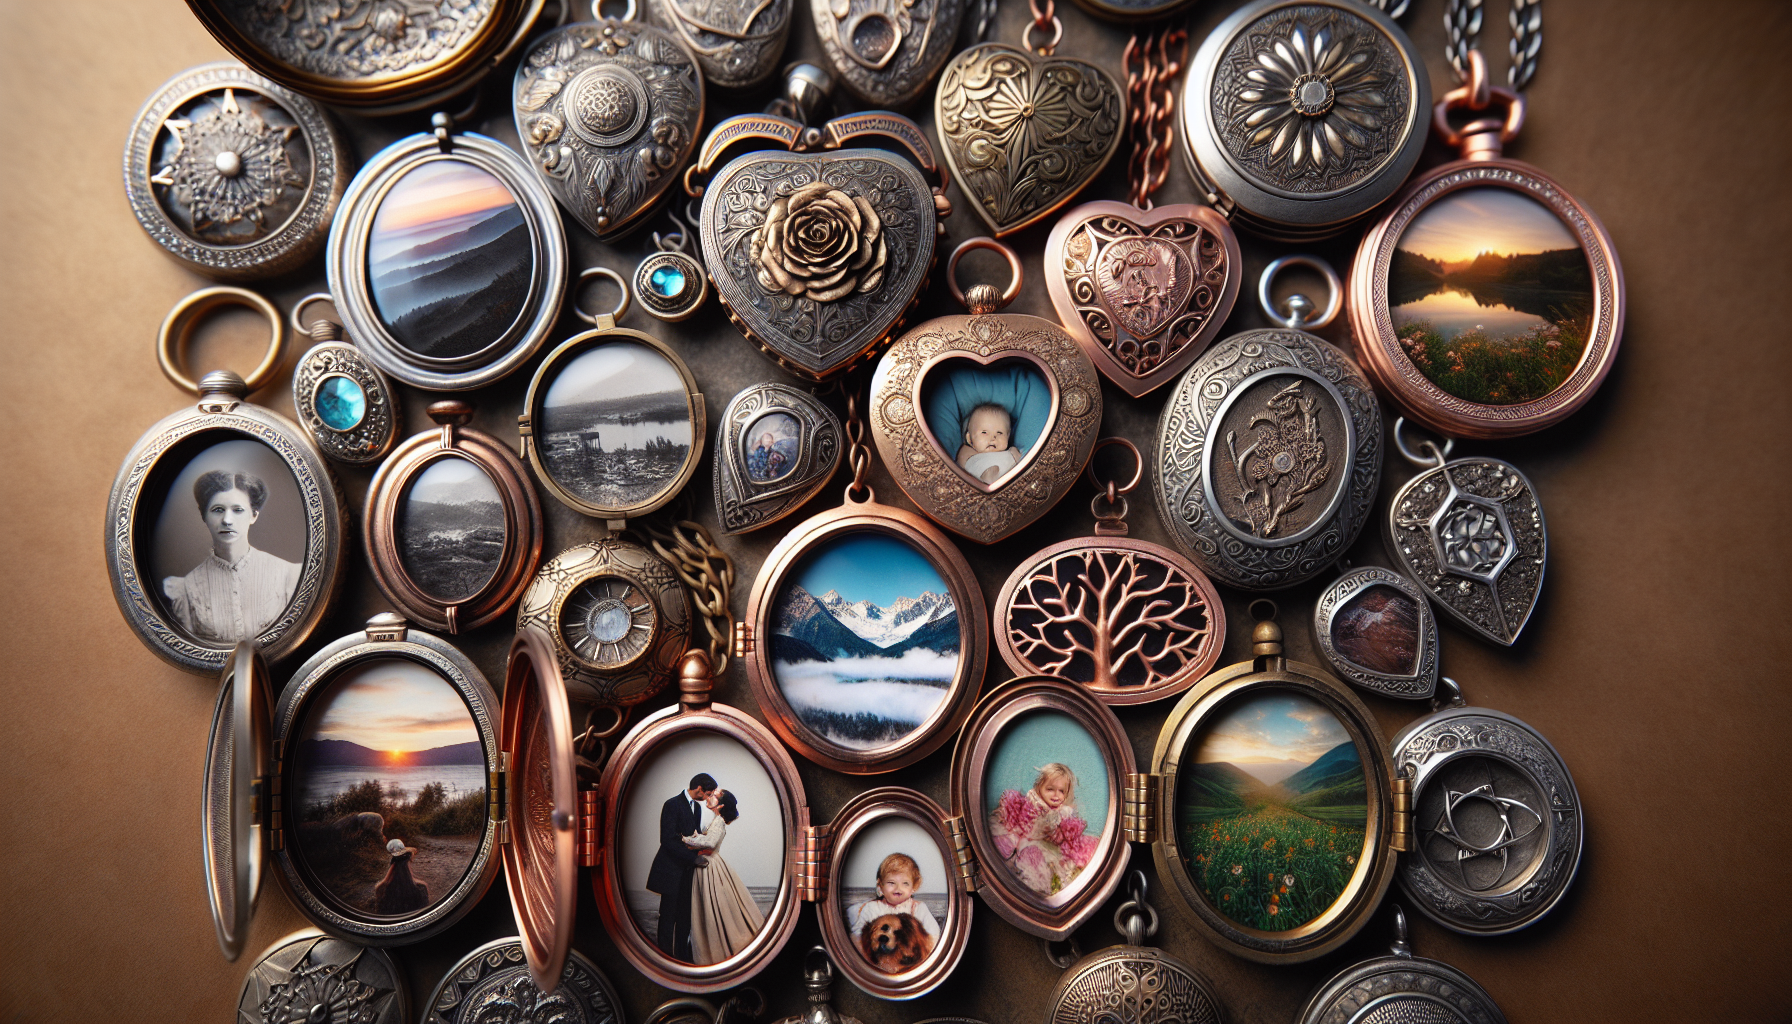 A picturesque array of various intricate lockets opened to reveal tiny photo galleries within. Each locket reflecting a unique journey; a locket from a Victorian era showcasing a black and white famil